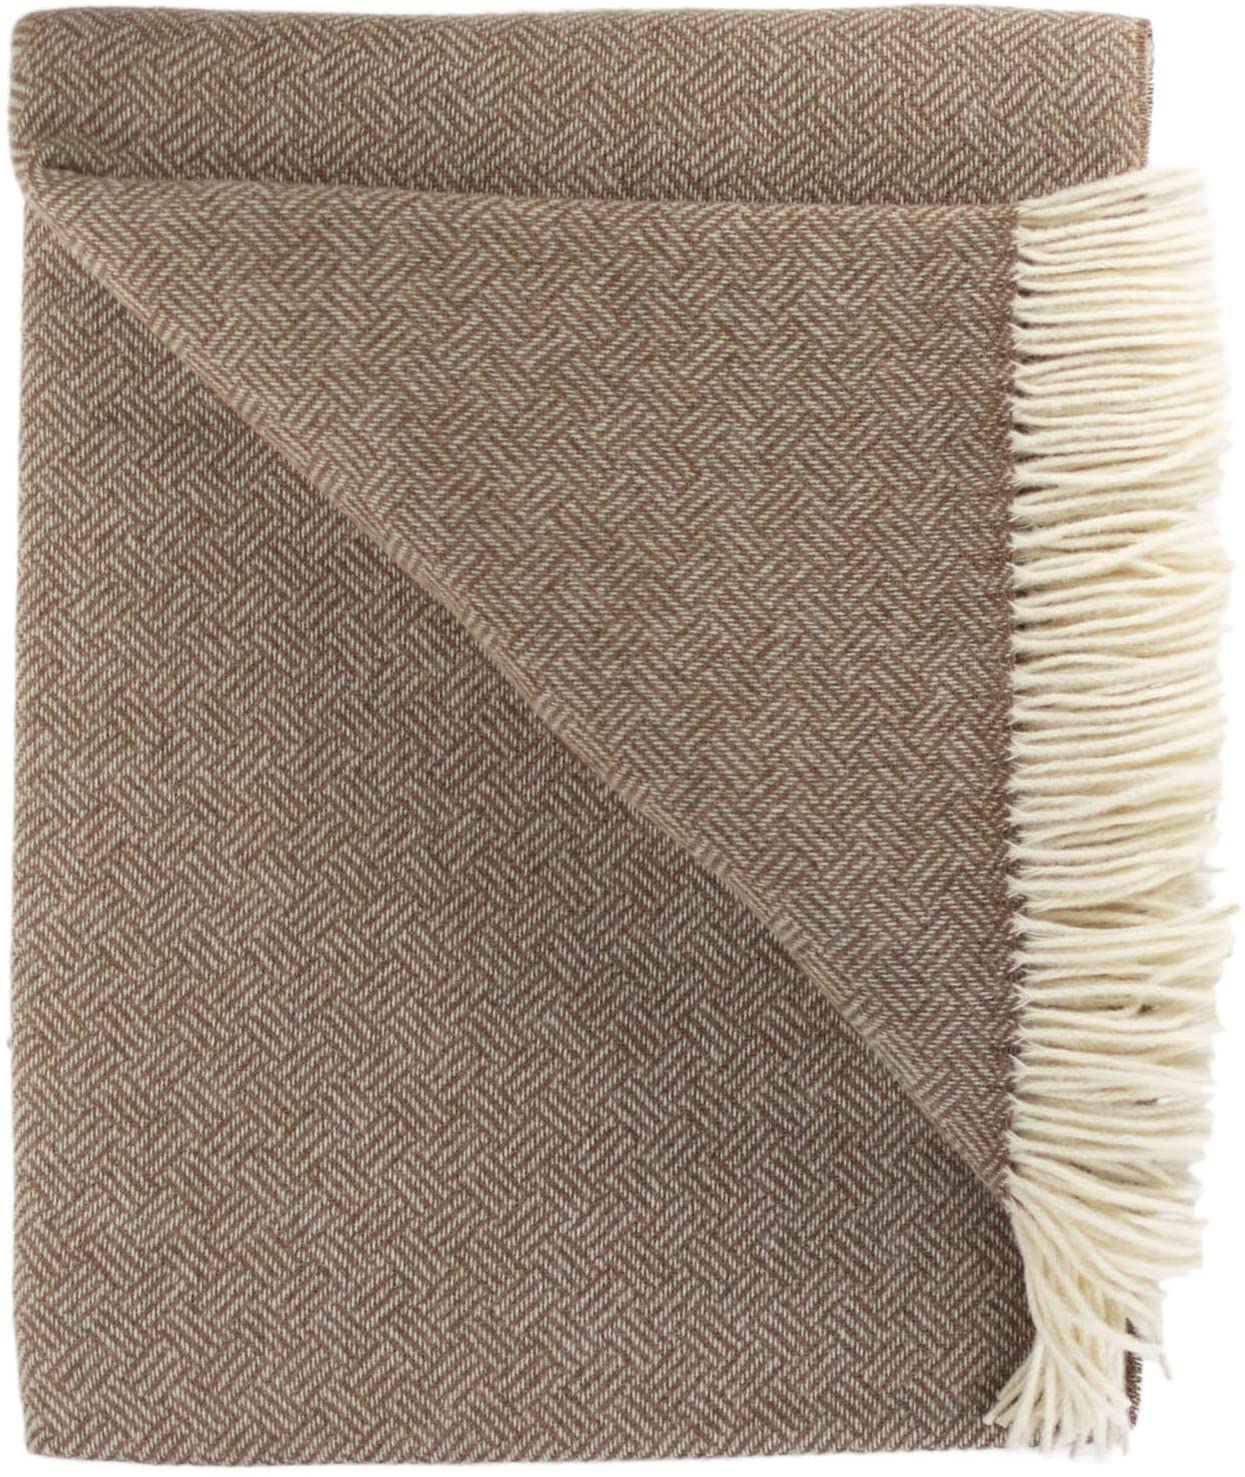 Southampton Home Merino Wool Basket Weave Throw (Bronze)-Throws and Blankets-810032751104-Q300005-Prince of Scots